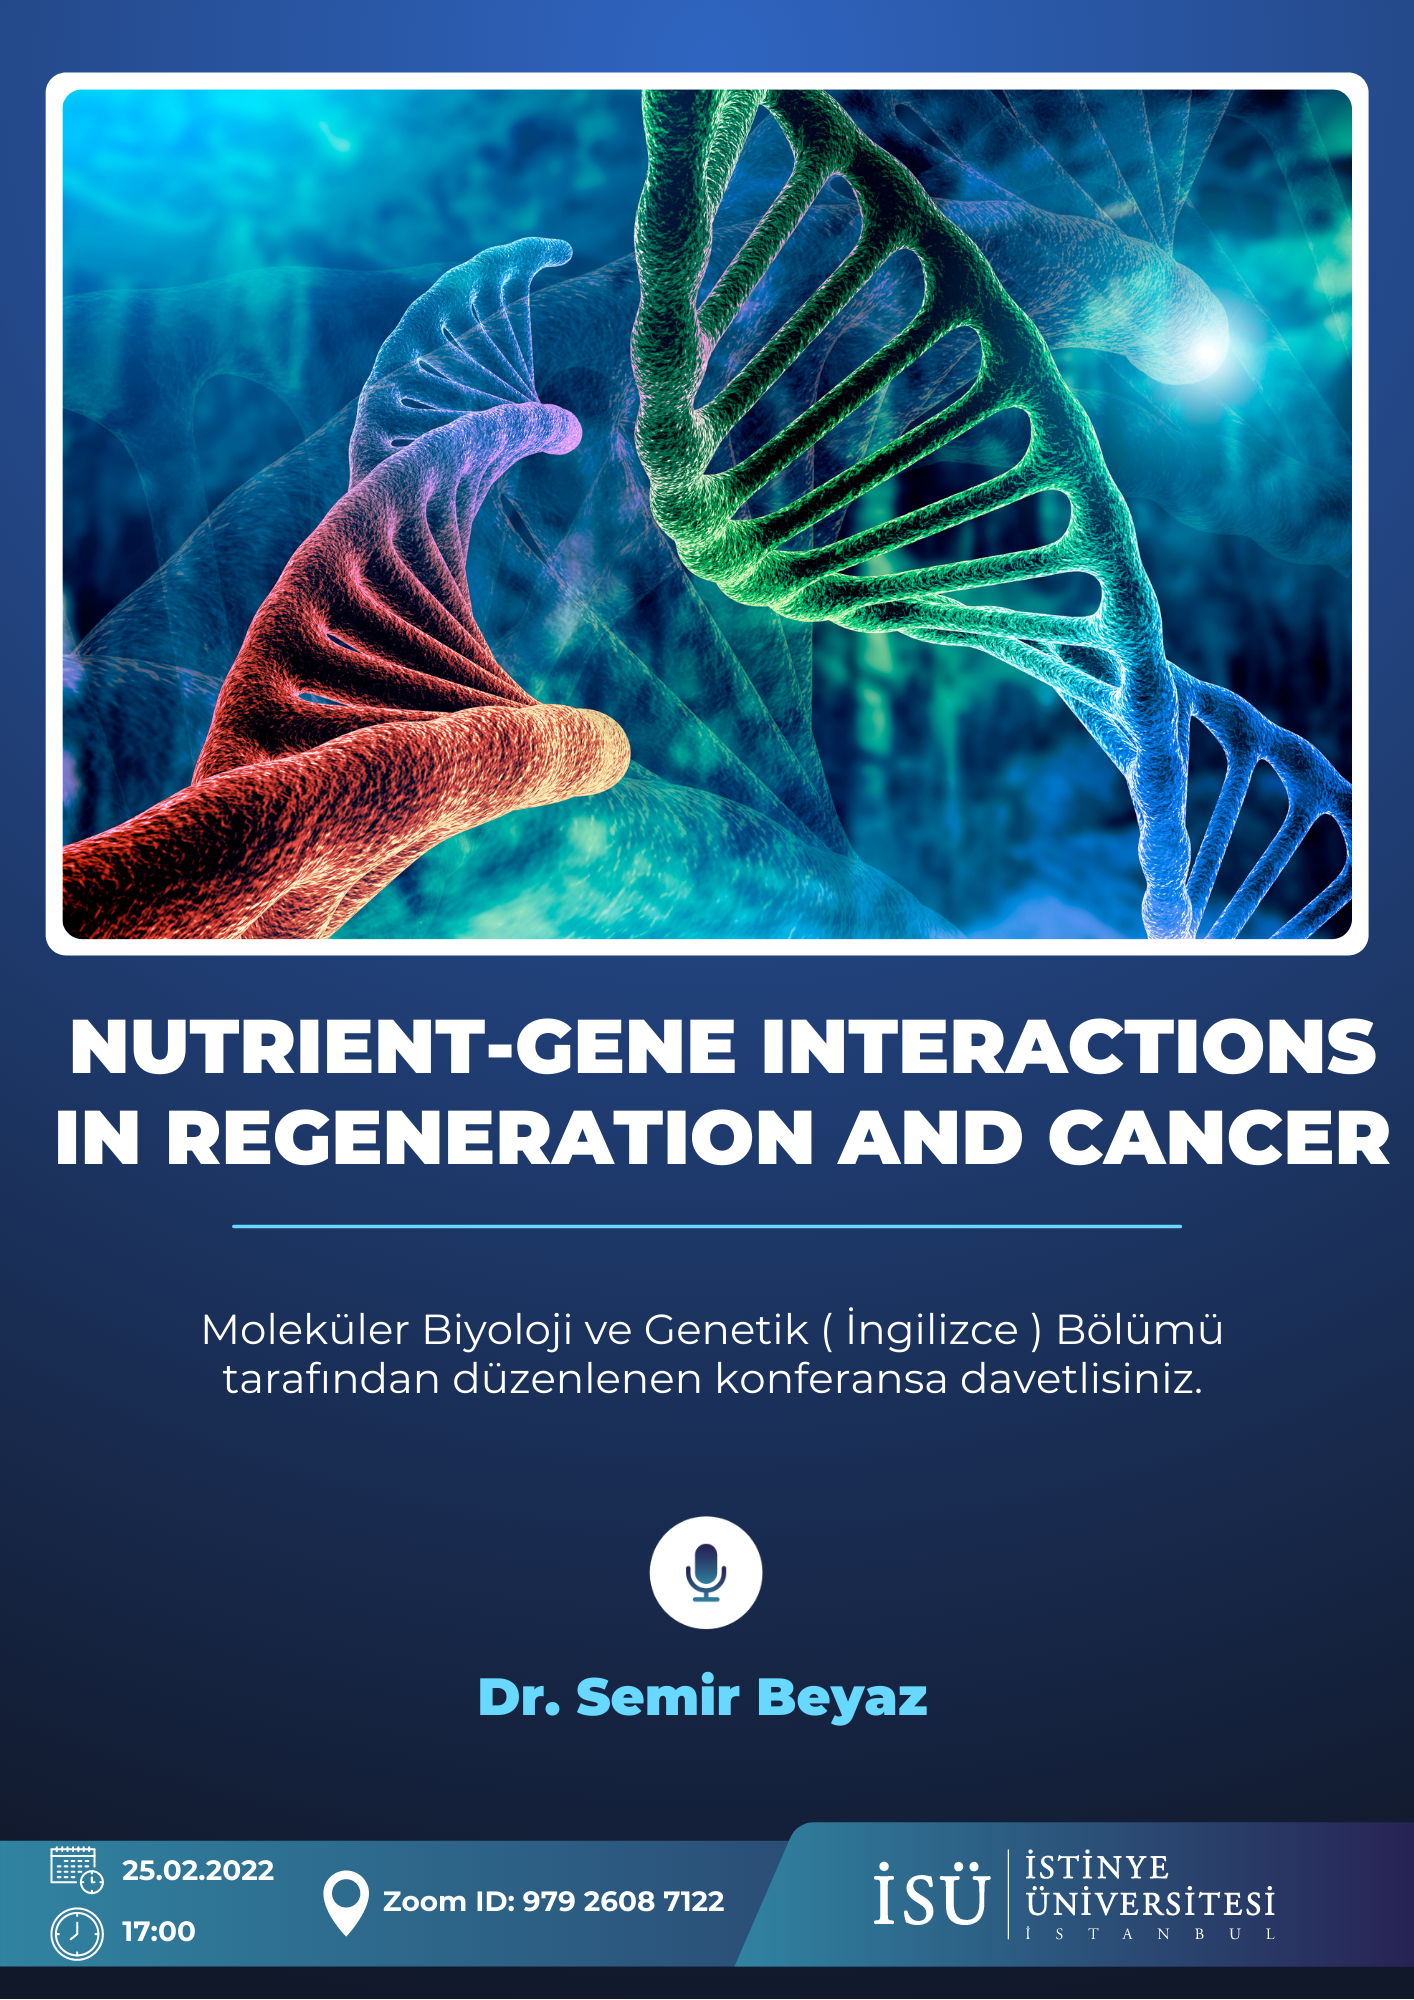 Nutrient-Gene Interactions in Regeneration and Cancer